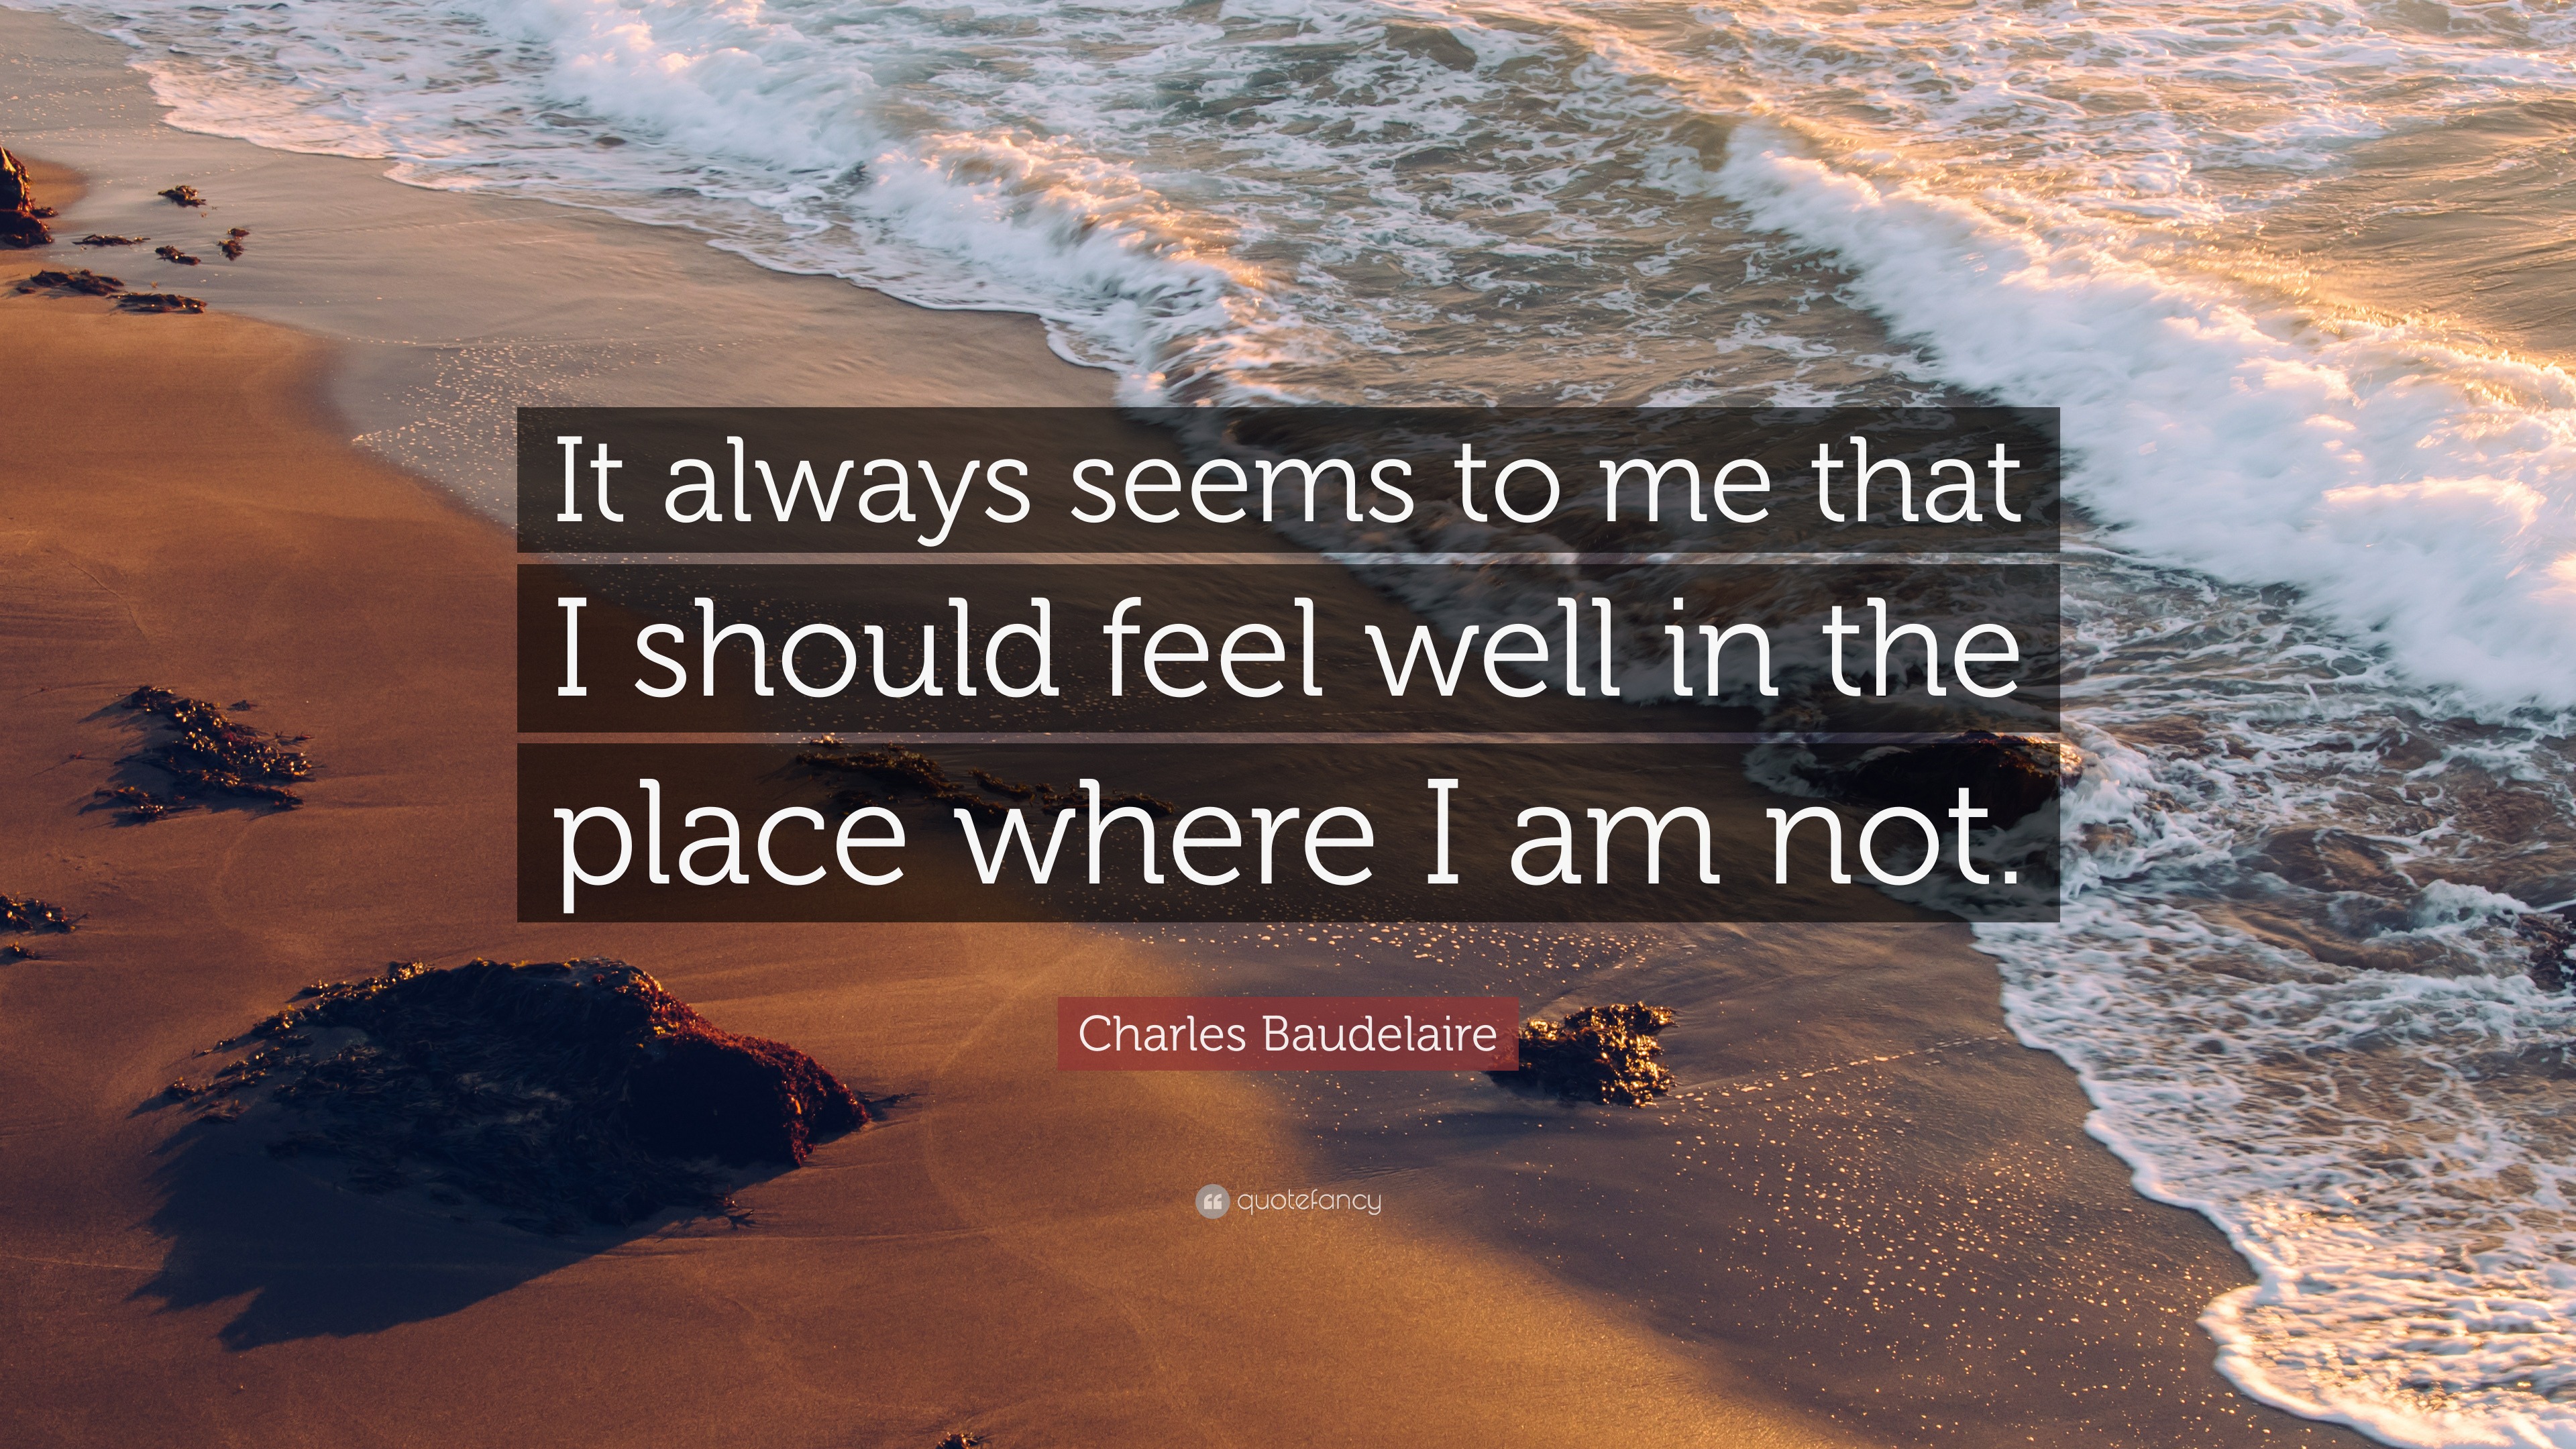 Charles Baudelaire Quote: “It always seems to me that I should feel ...